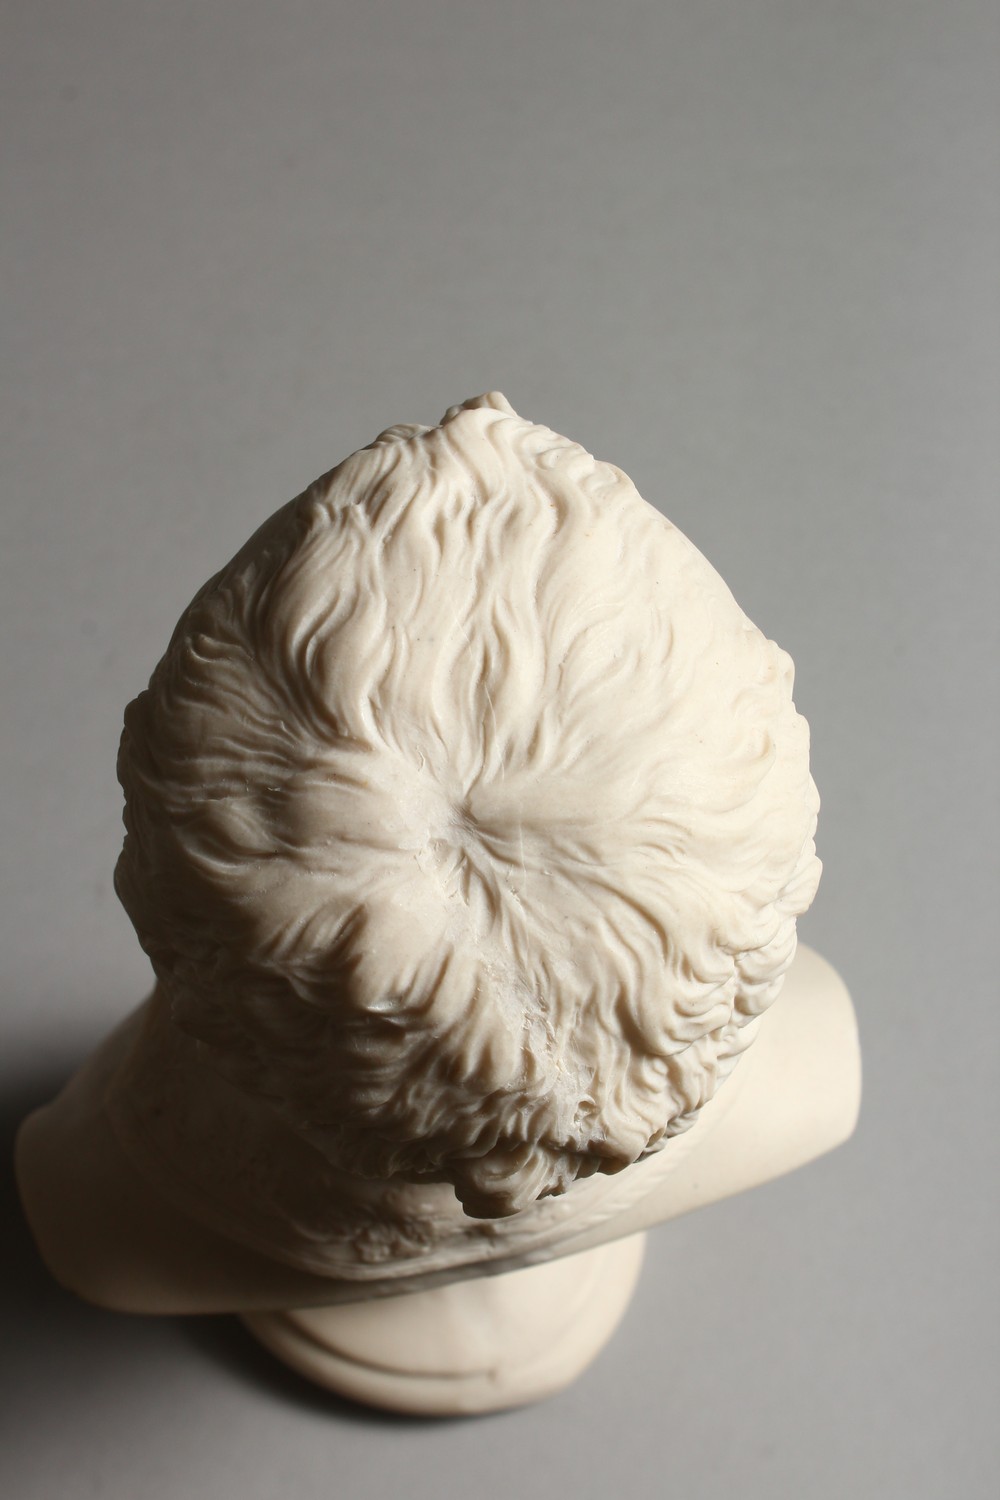 A PARIAN WARE STYLE BUST OF NAPOLEON. 10.5ins high. - Image 10 of 11